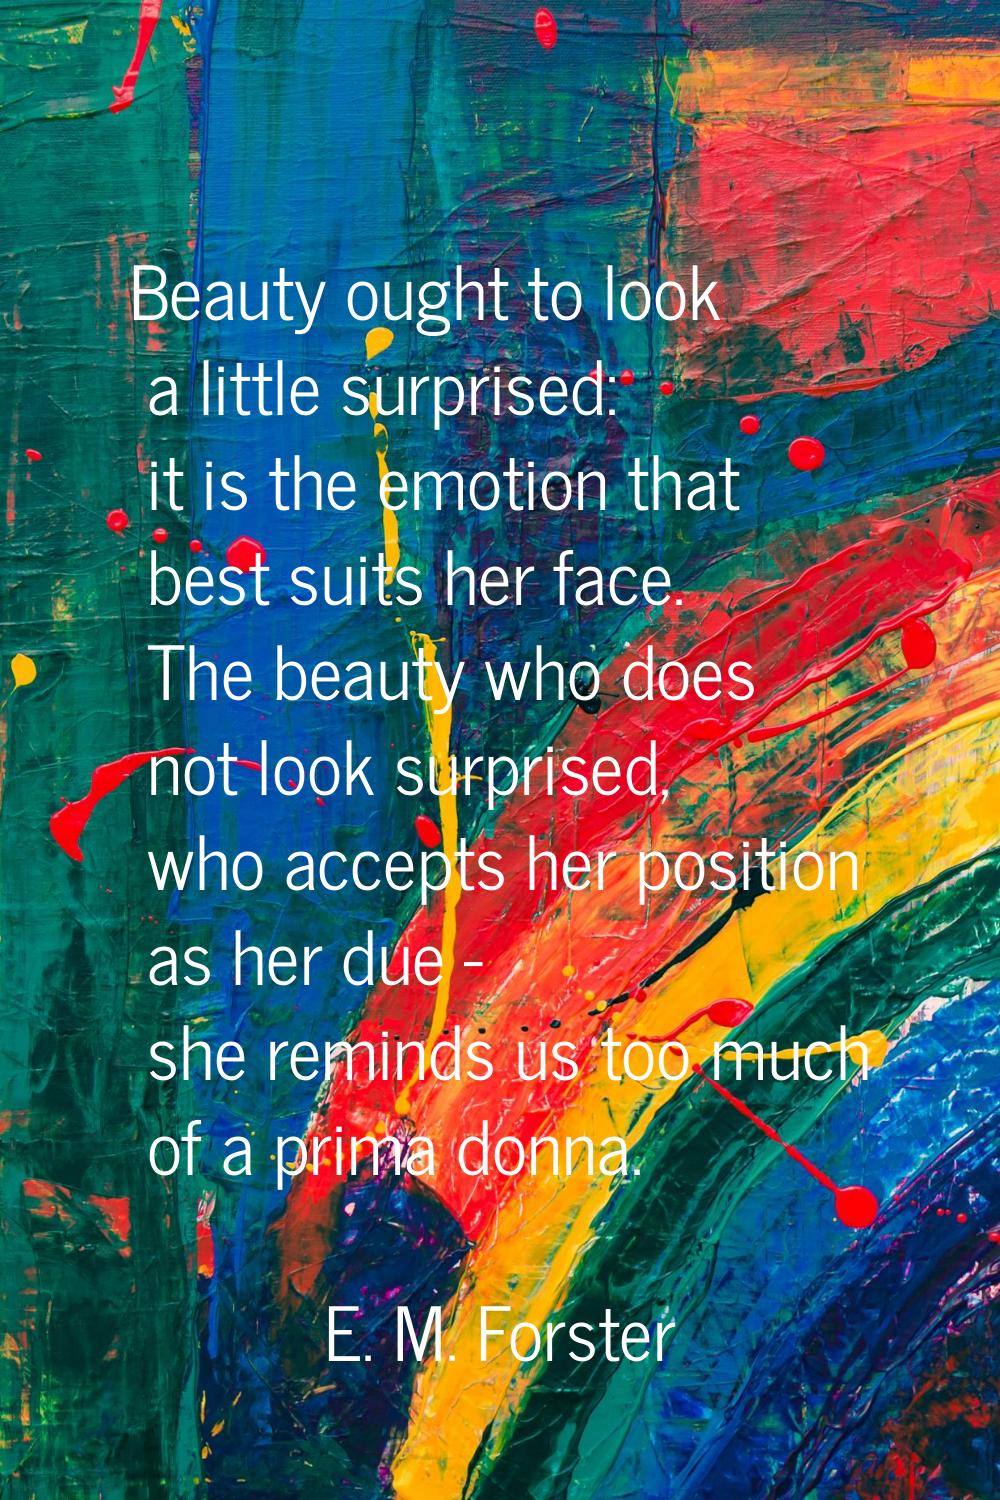 Beauty ought to look a little surprised: it is the emotion that best suits her face. The beauty who